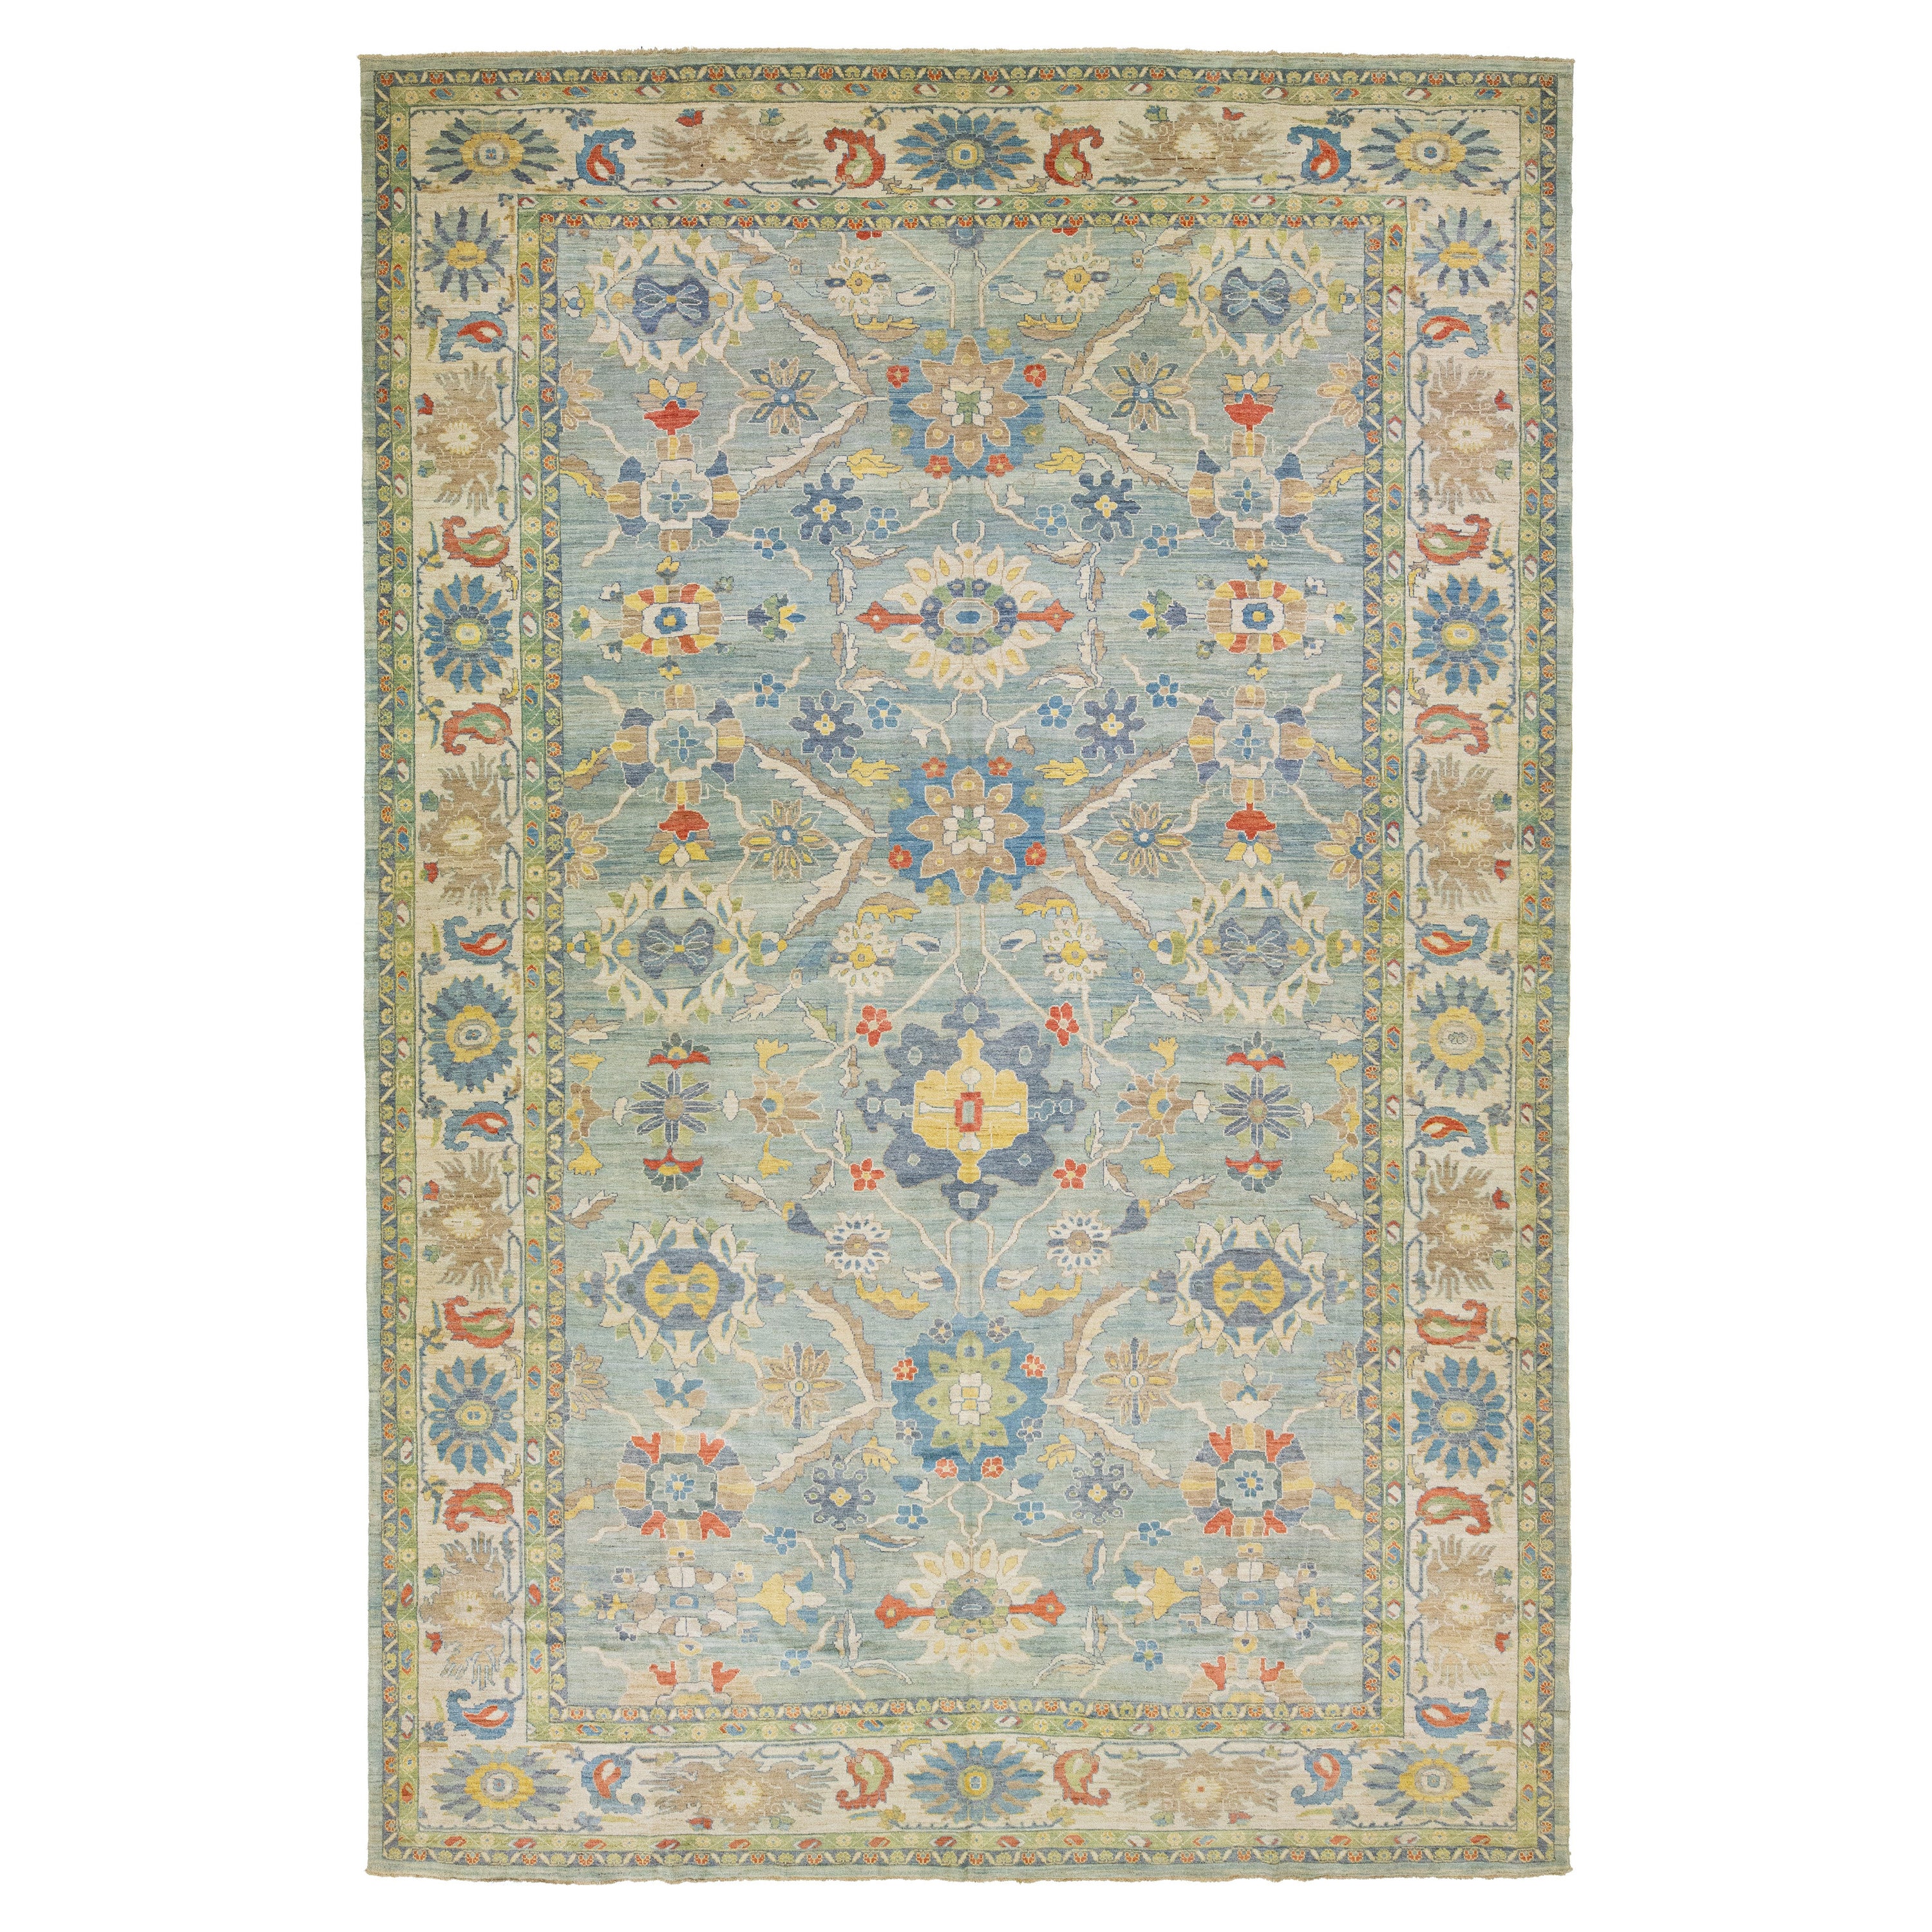  Blue Sultanabad Oversize Wool Rug with Modern Floral Design For Sale